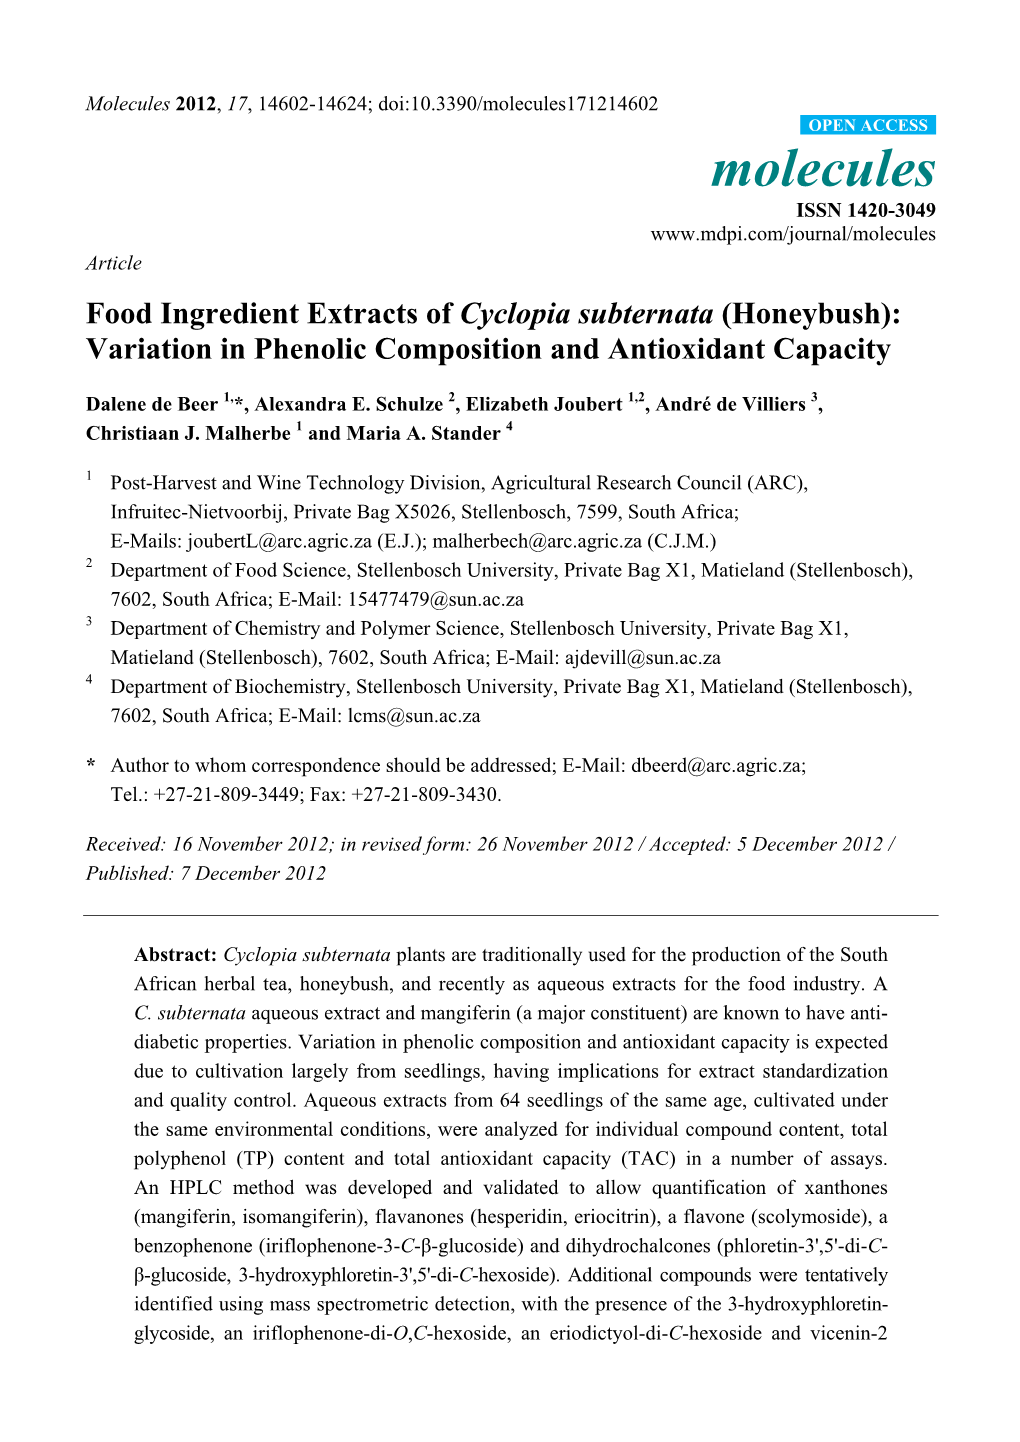 Food Ingredient Extracts of Cyclopia Subternata (Honeybush): Variation in Phenolic Composition and Antioxidant Capacity